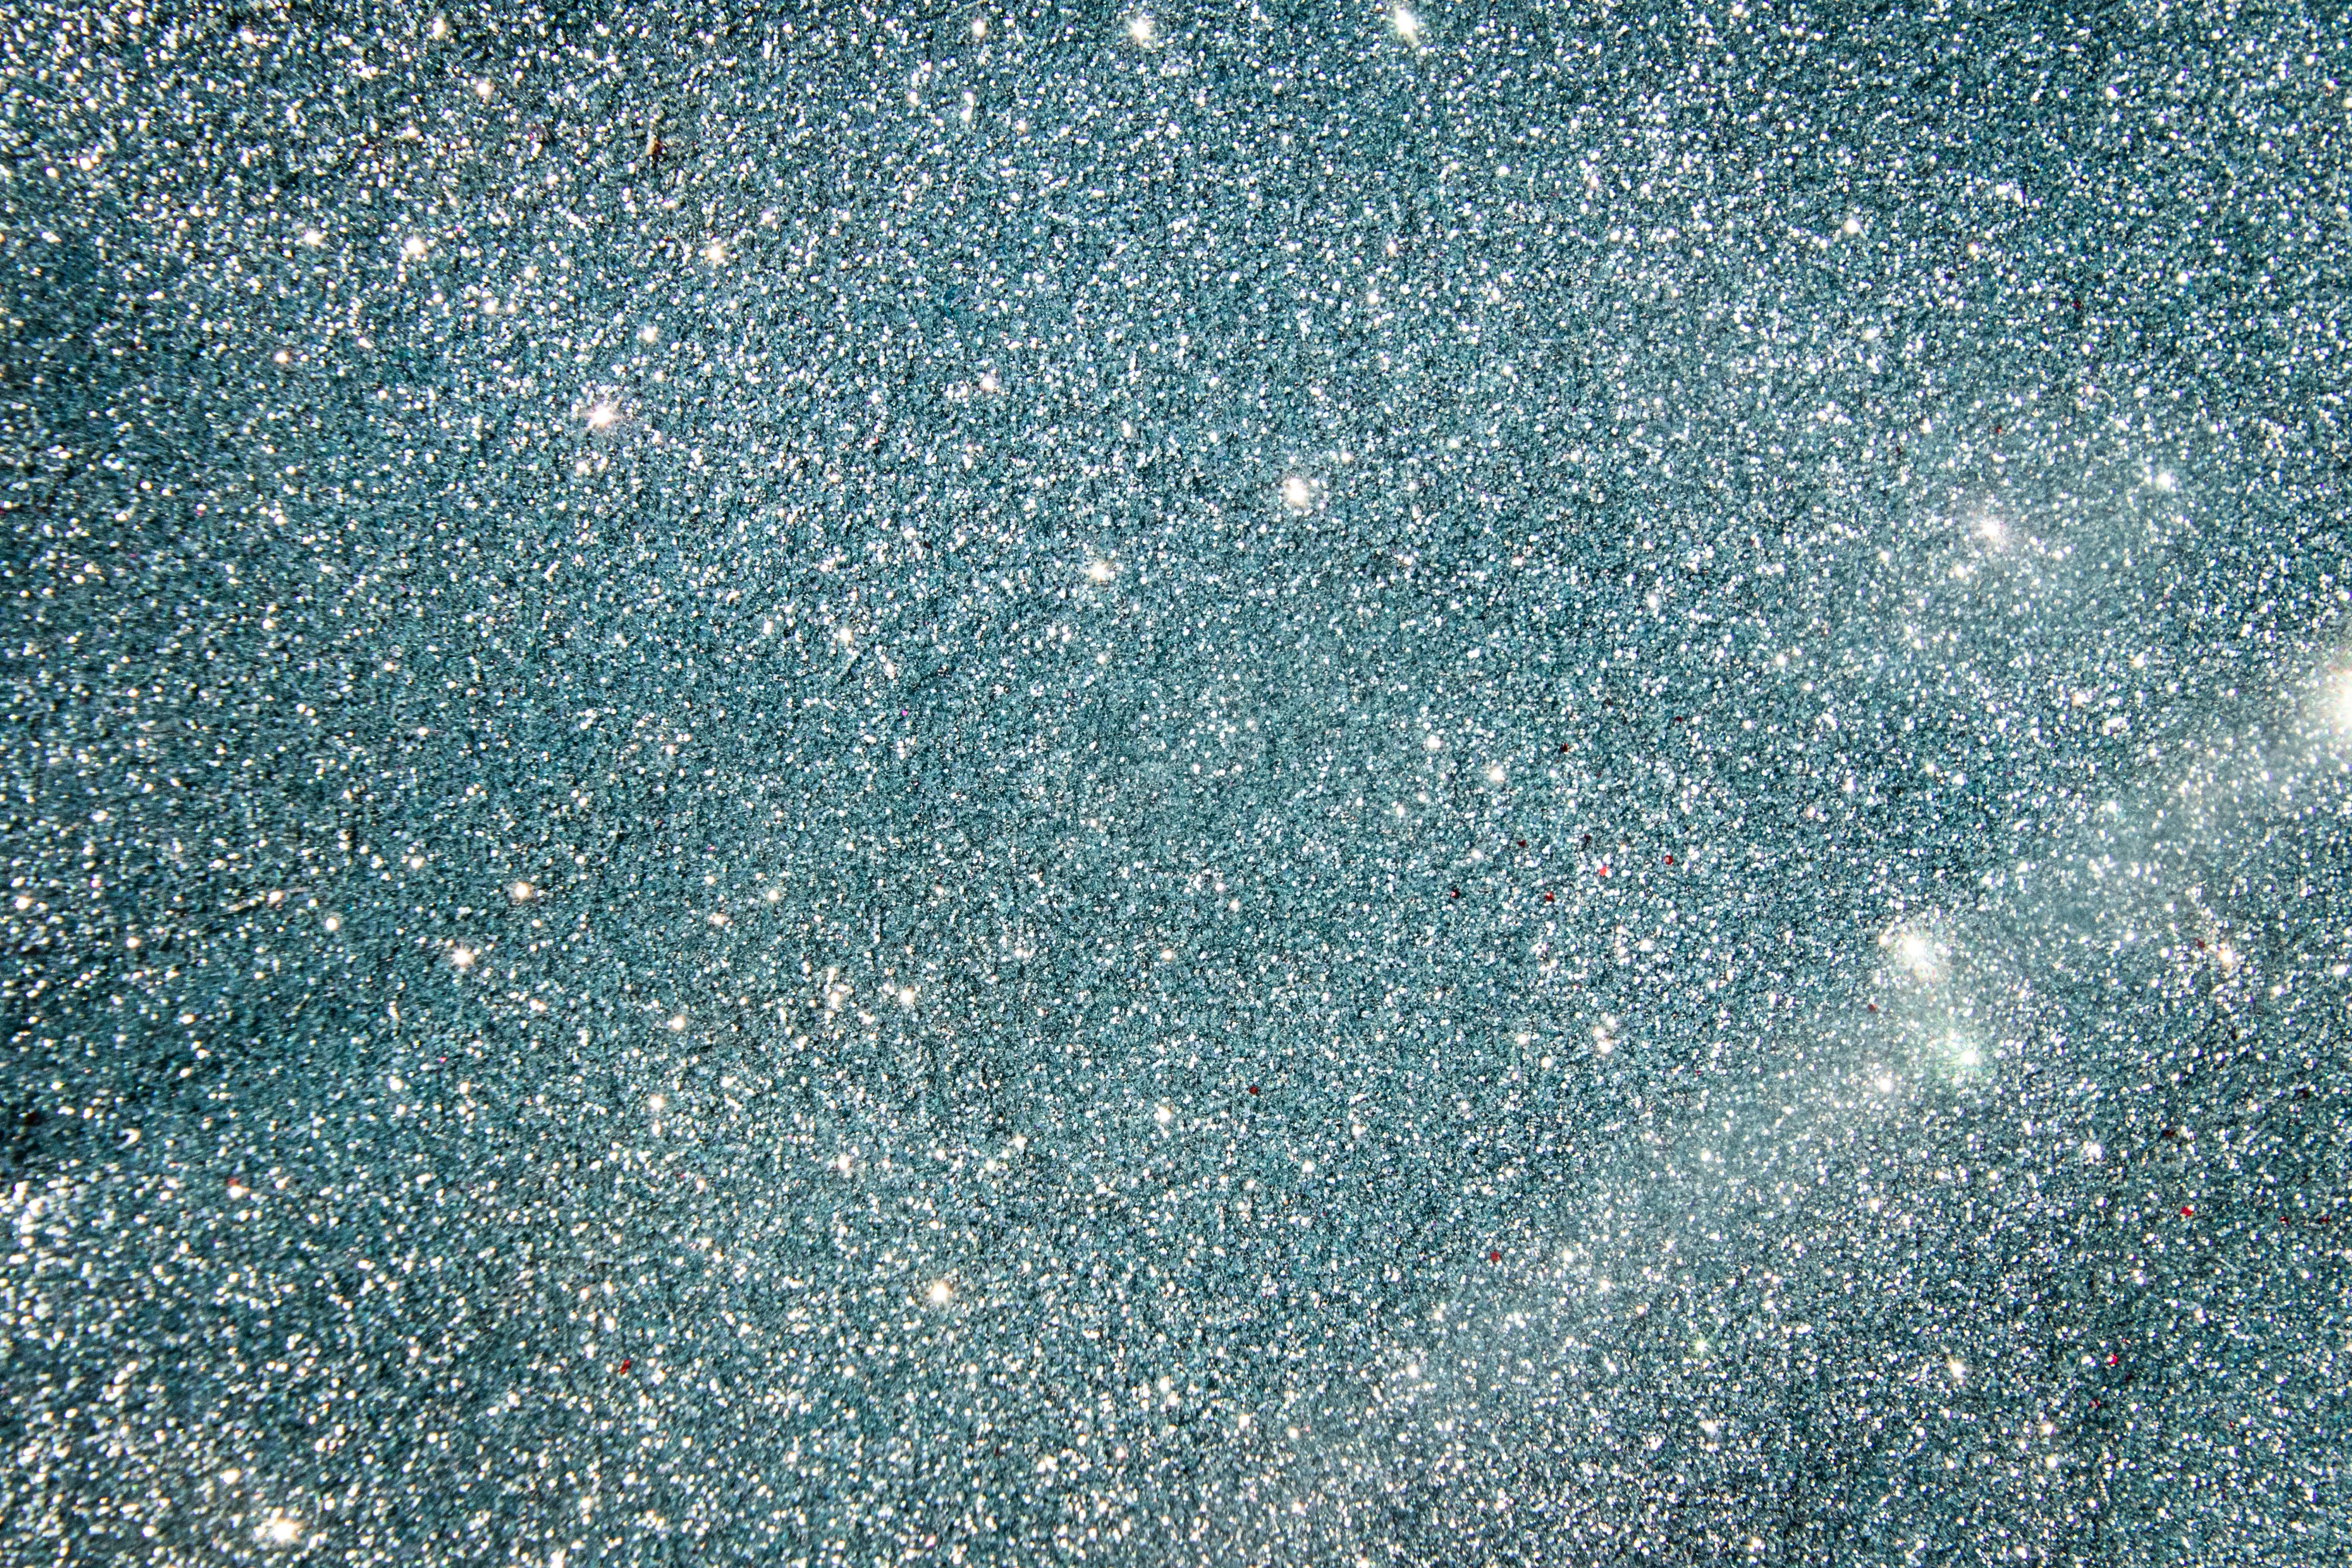 Blue Glitter, Free stock photos - Rgbstock - Free stock images, Ladida